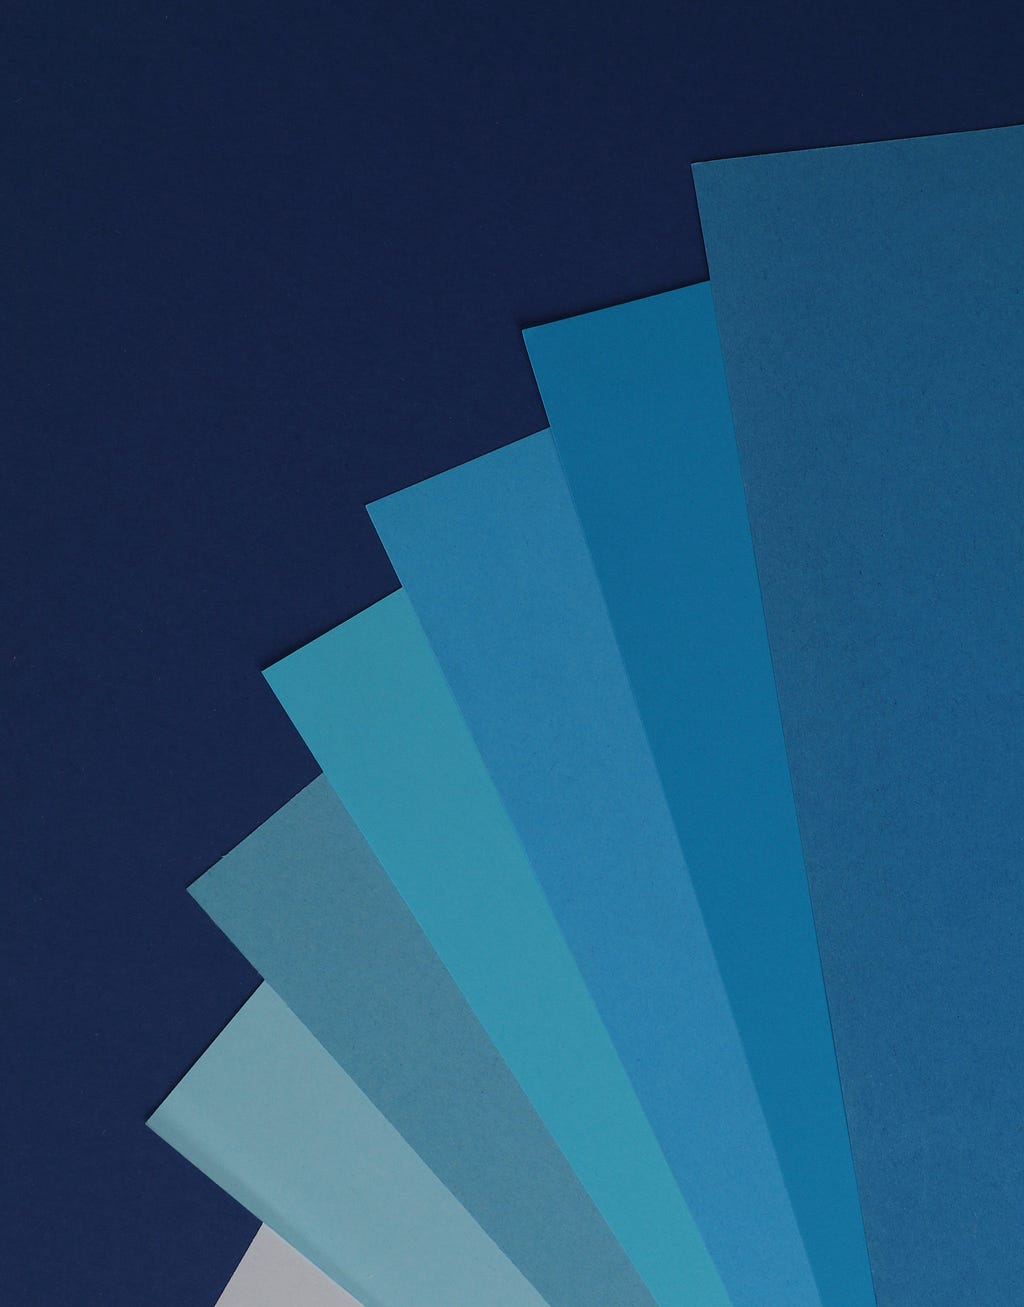 Five sections of different shades of blue on top of a navy background.